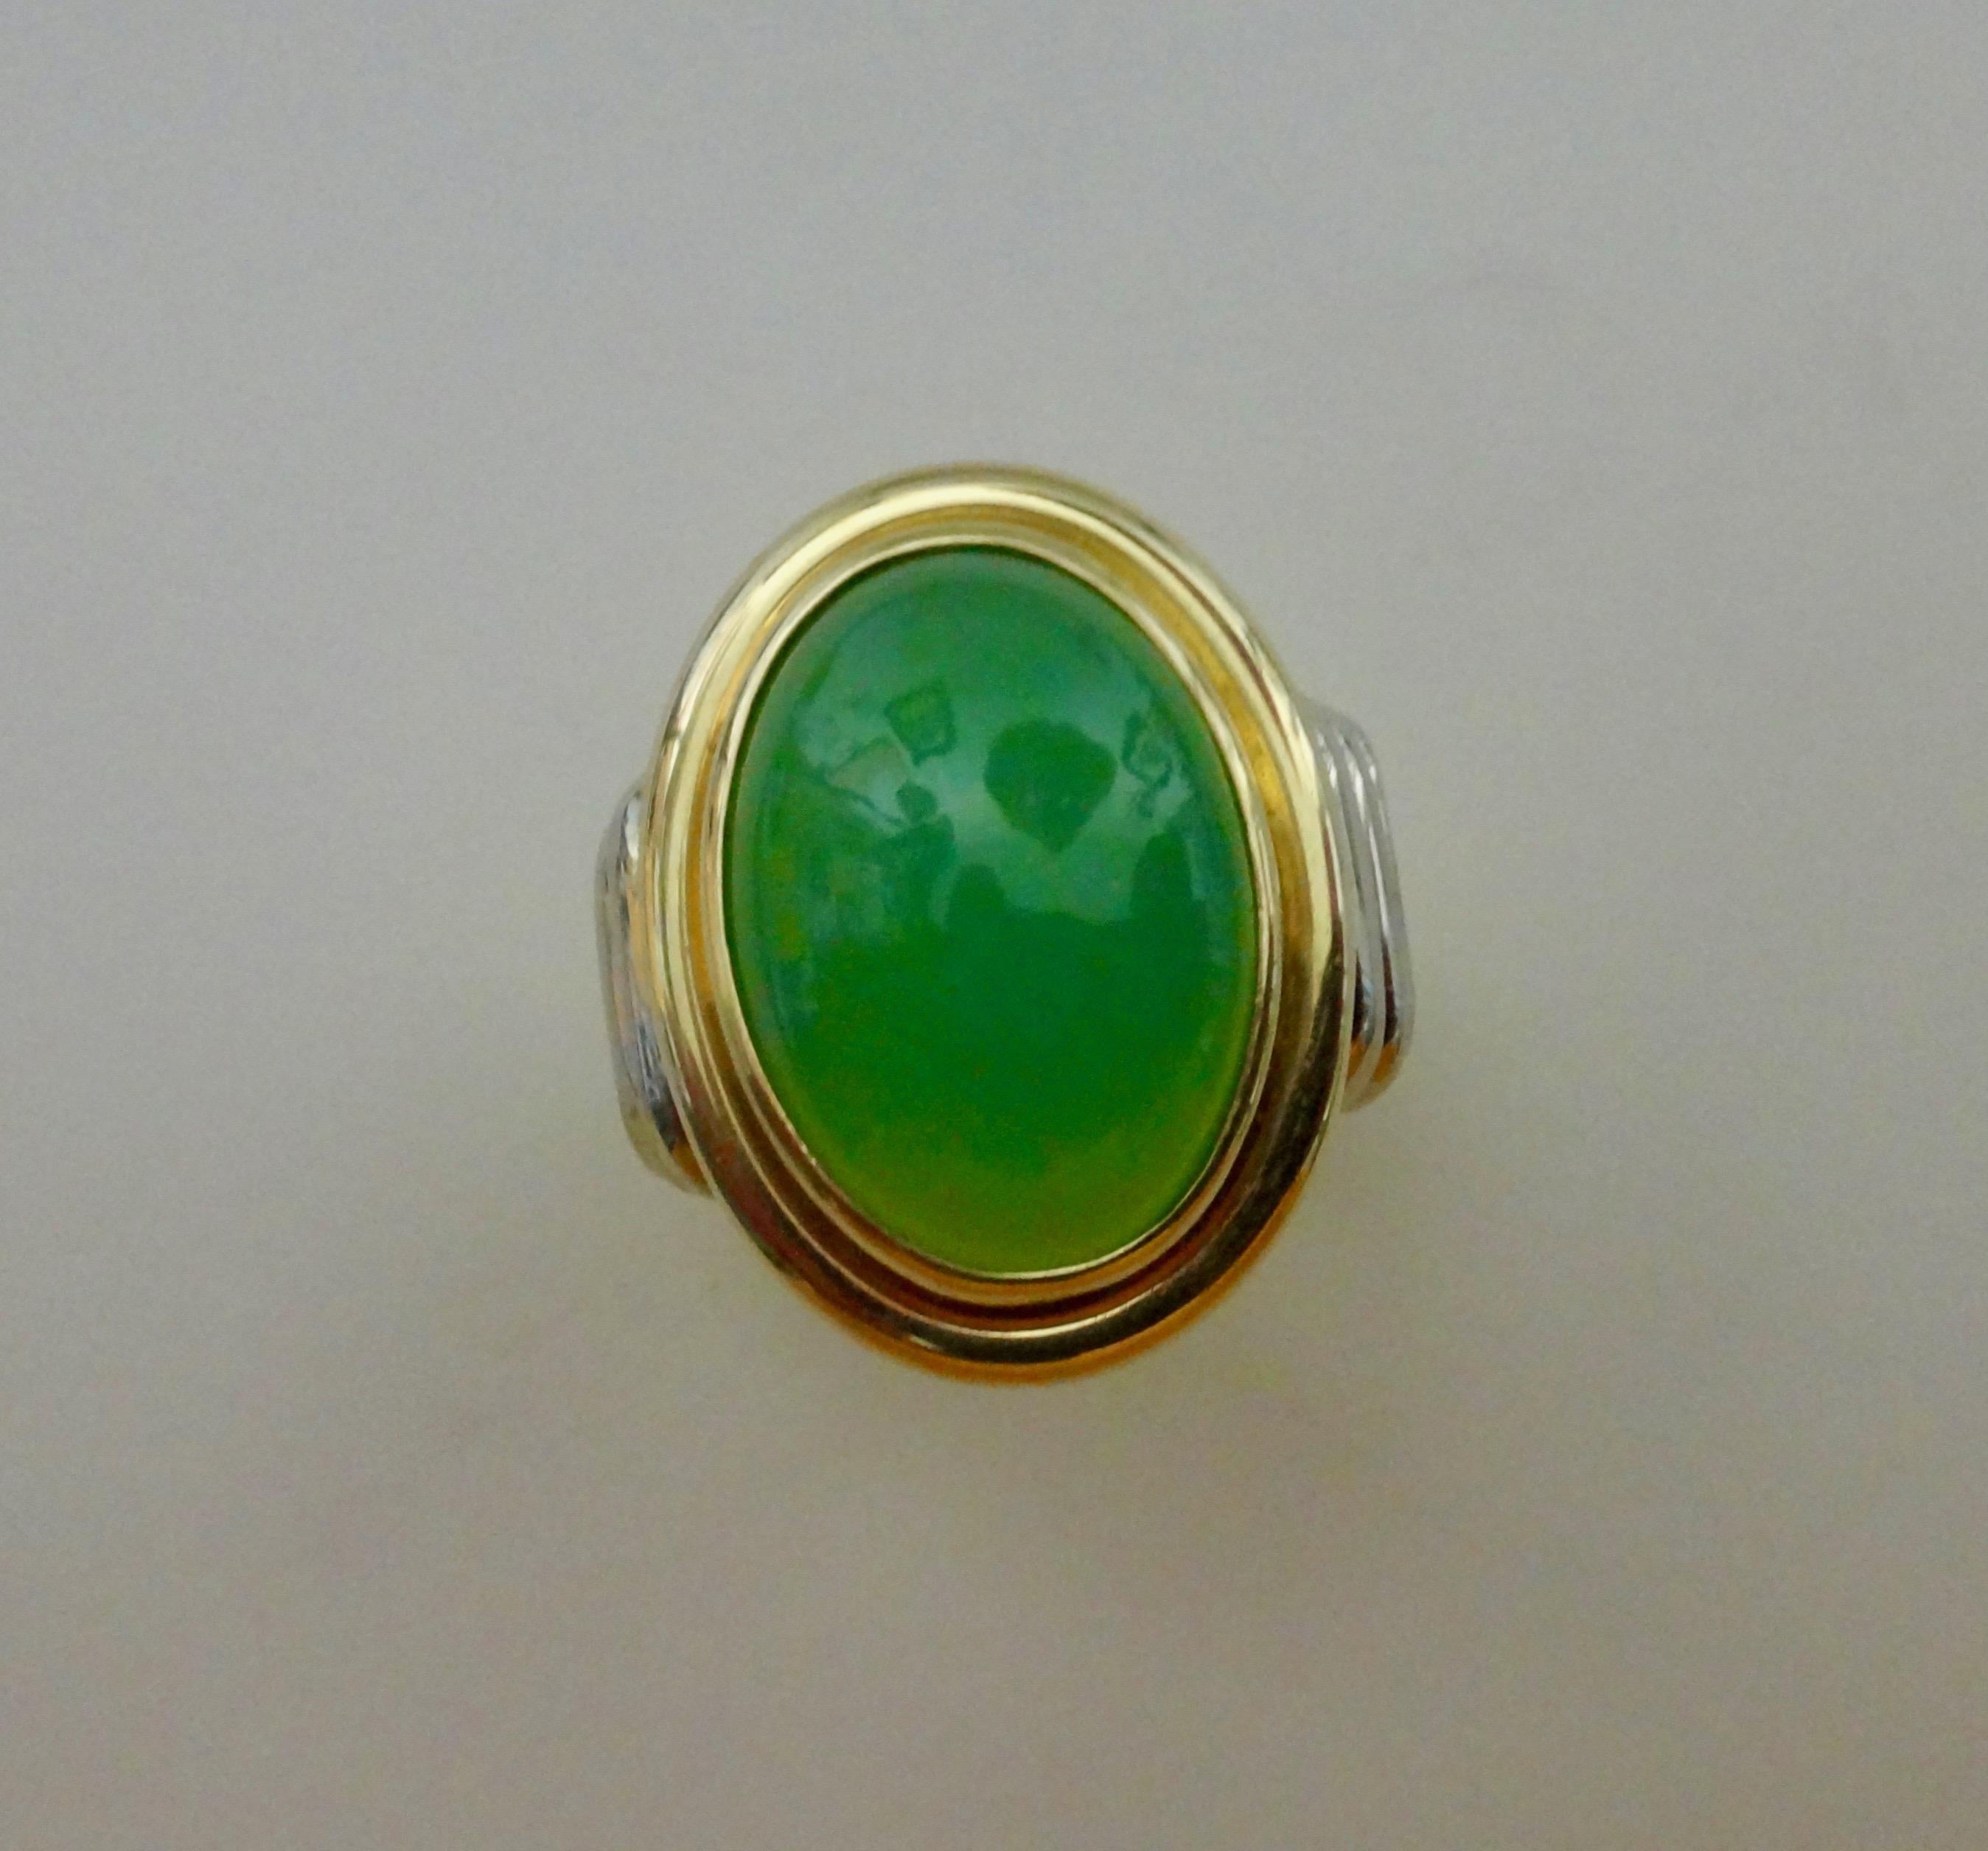 A gem quality chrysoprase (origin: Australia) is set in a hand fabricated 18k yellow and white gold ring.  The bezel set gem is a rich apple green and possesses a flawless finish.  The ribbed design of the shank keeps ware to a minimum.  The ring is